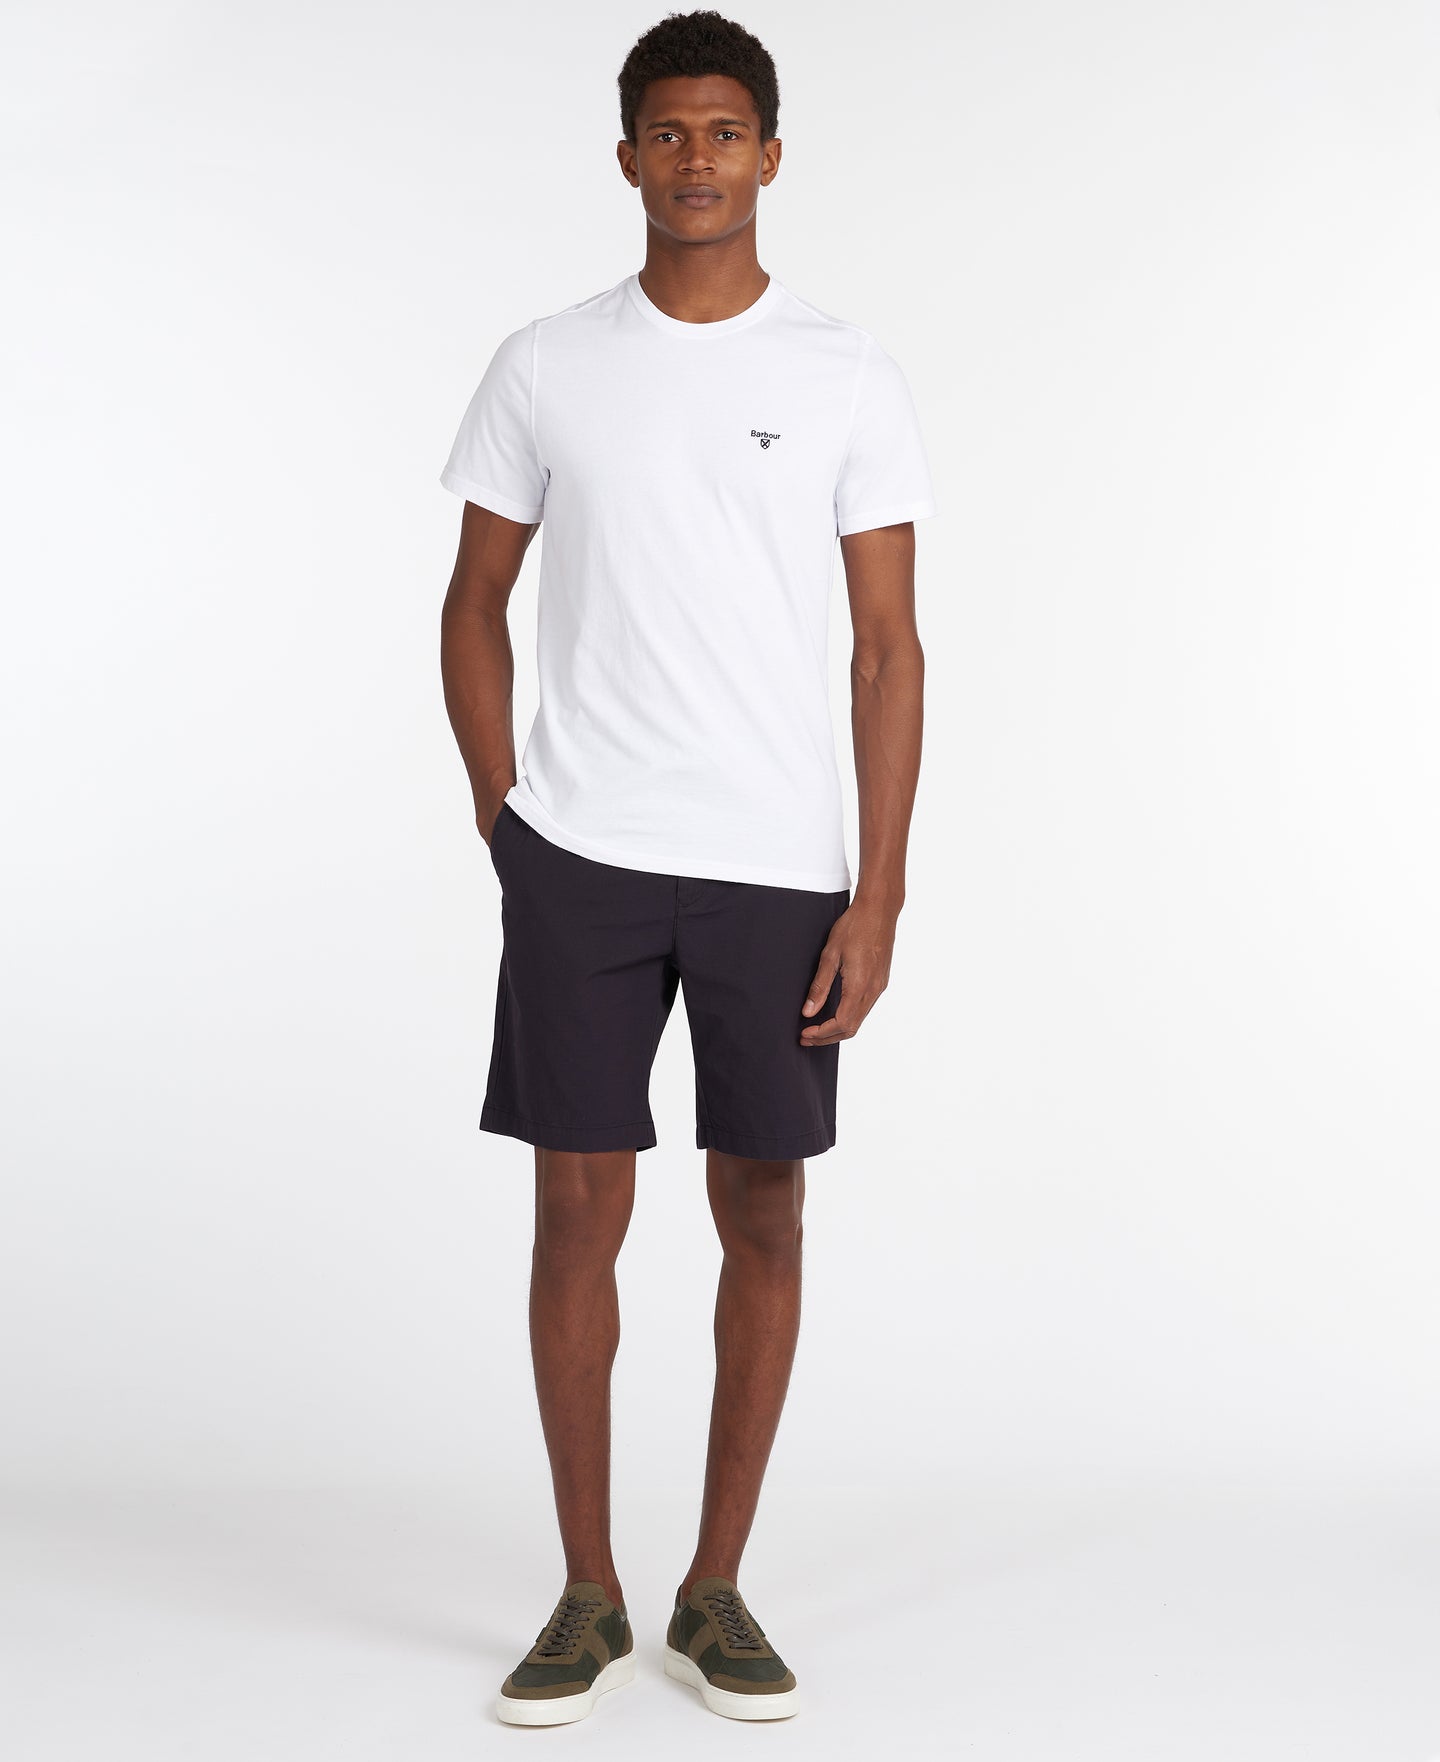 Barbour Mts0331wh11 Barbour Ess Sports Tee White